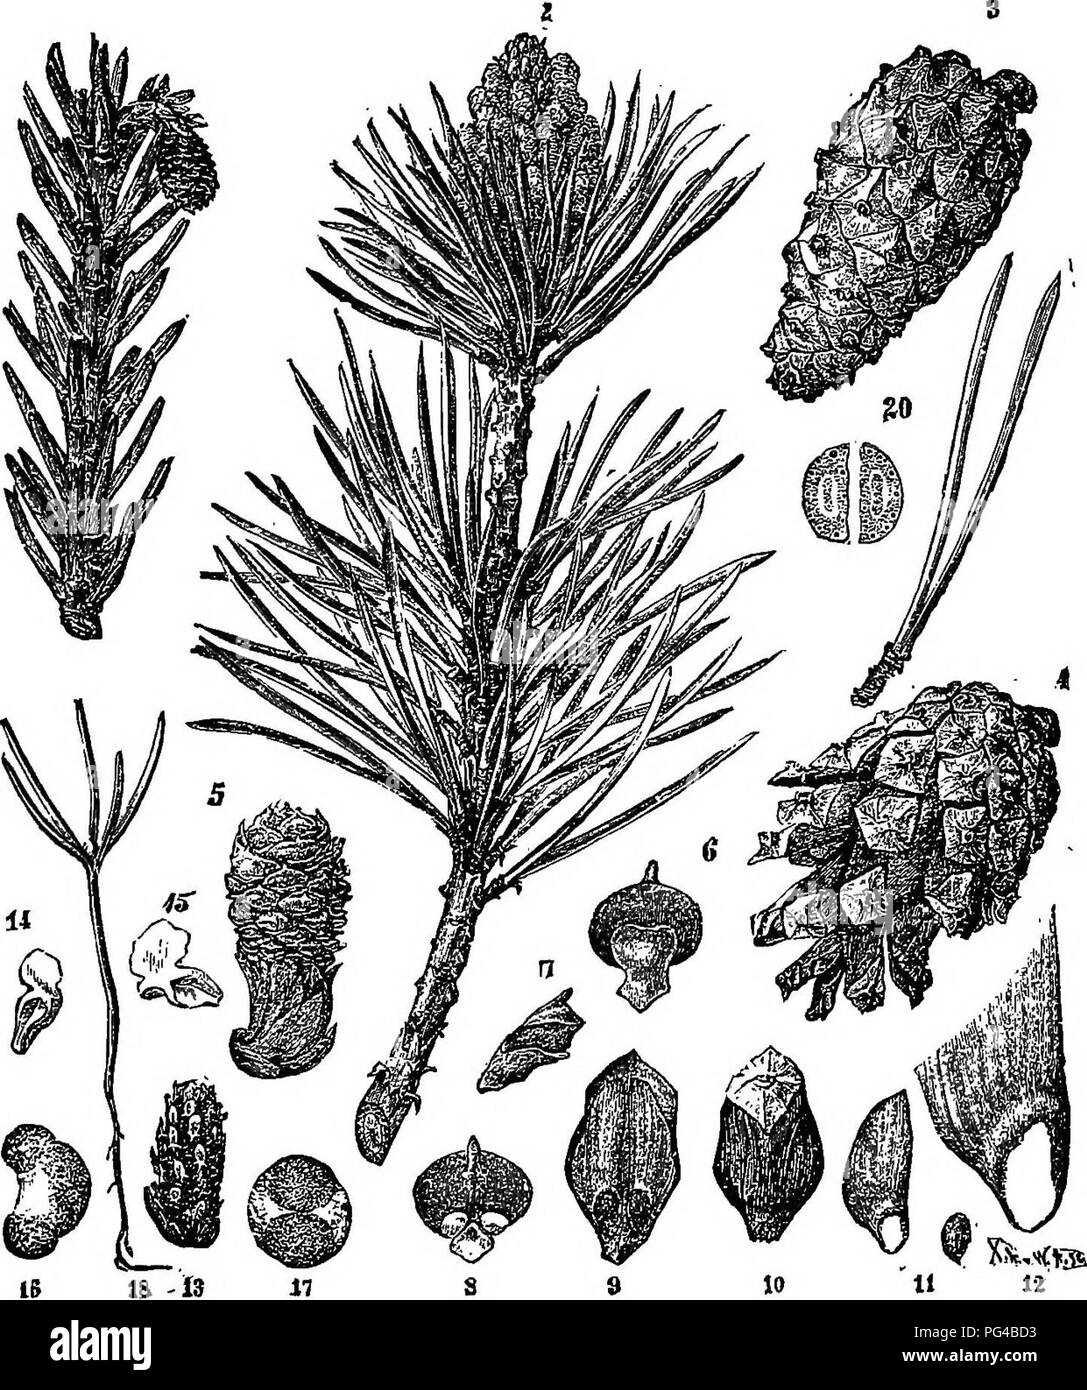 . The elements of forestry : designed to afford information concerning the planting and care of forest trees for ornament or profit and giving suggestions upon the creation and care of woodlands with the view of securing the greatest benefit for the longest time, particularly adapted to the wants and conditions of the United States. Forests and forestry. The Conifers. 301. 149. PinussylvestTis: Scotch Pine.—1. Atwigwith a defected pistil ate flower. 2. Anoldertwig, bearing; a cluster of oval staminate flowers. 8. The former enlarged, as it approaches the period of maturity. 4. The same after t Stock Photo